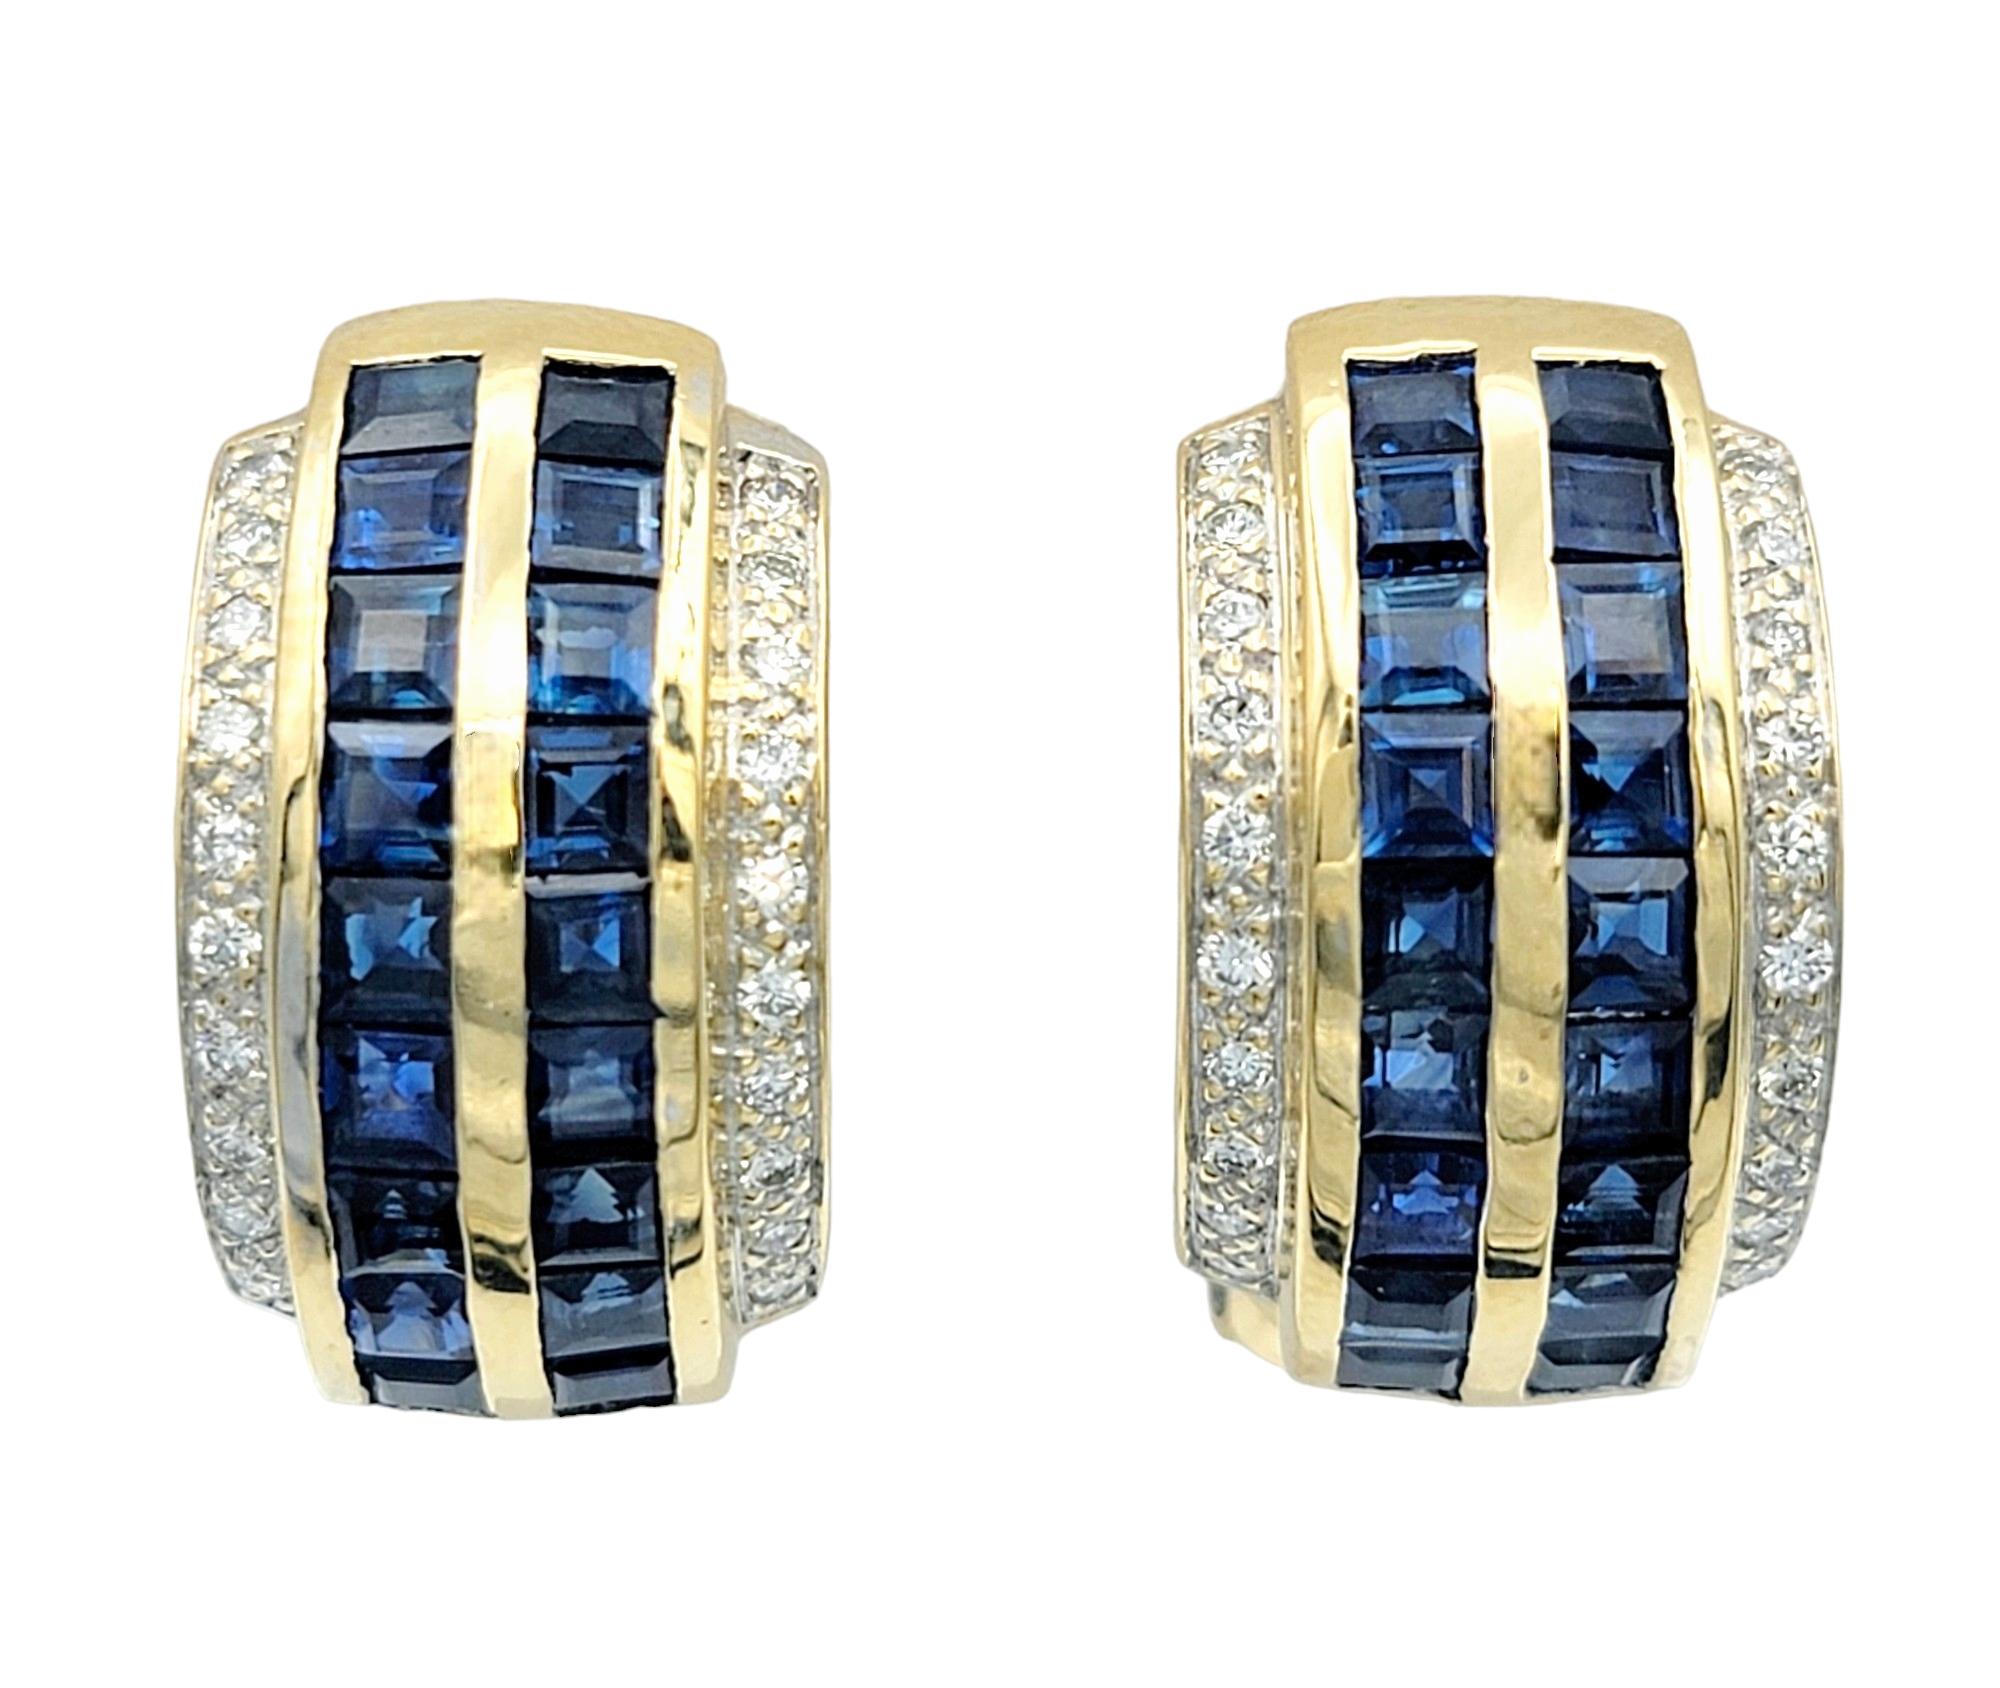 This unique pair of J-hoop earrings, crafted in radiant 14 karat yellow gold, is a stunning and sophisticated accessory. The center of each hoop features two rows of princess-cut sapphires, adding a vibrant and elegant touch to the design. The